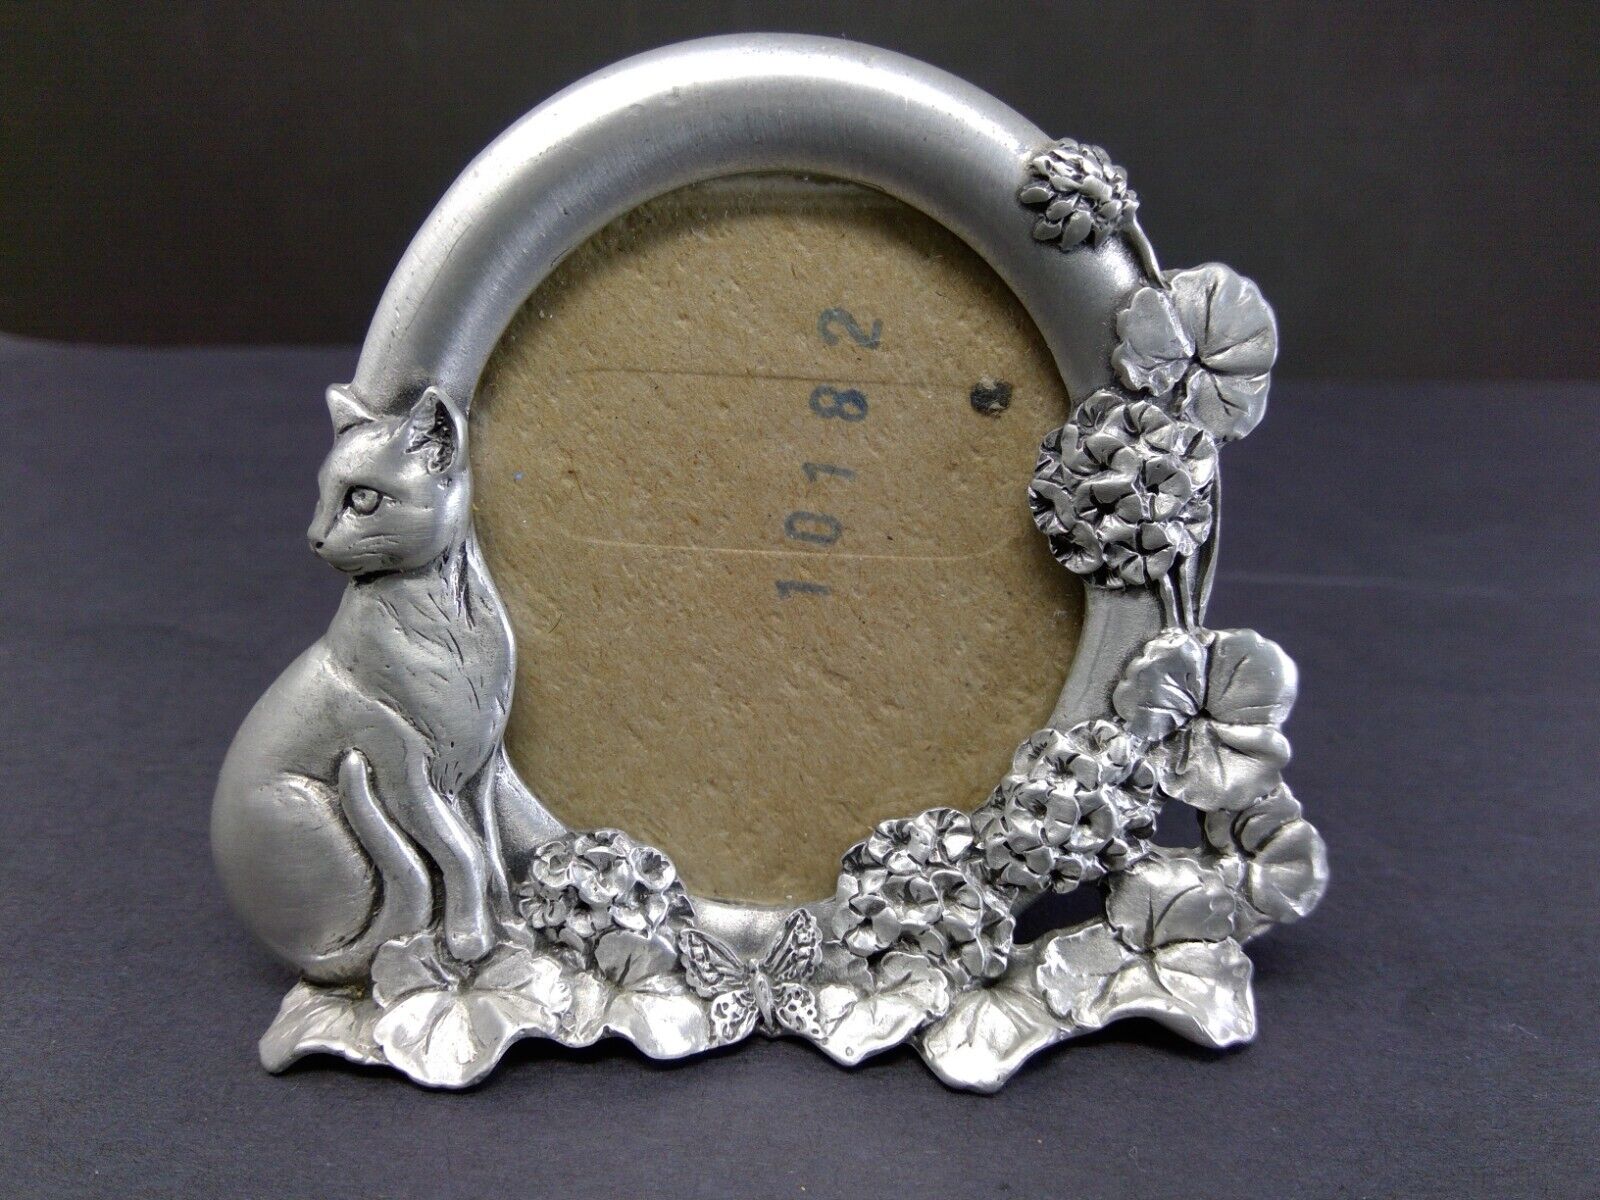 1997 Seagull Pewter Small Frame - Cat & Flowers